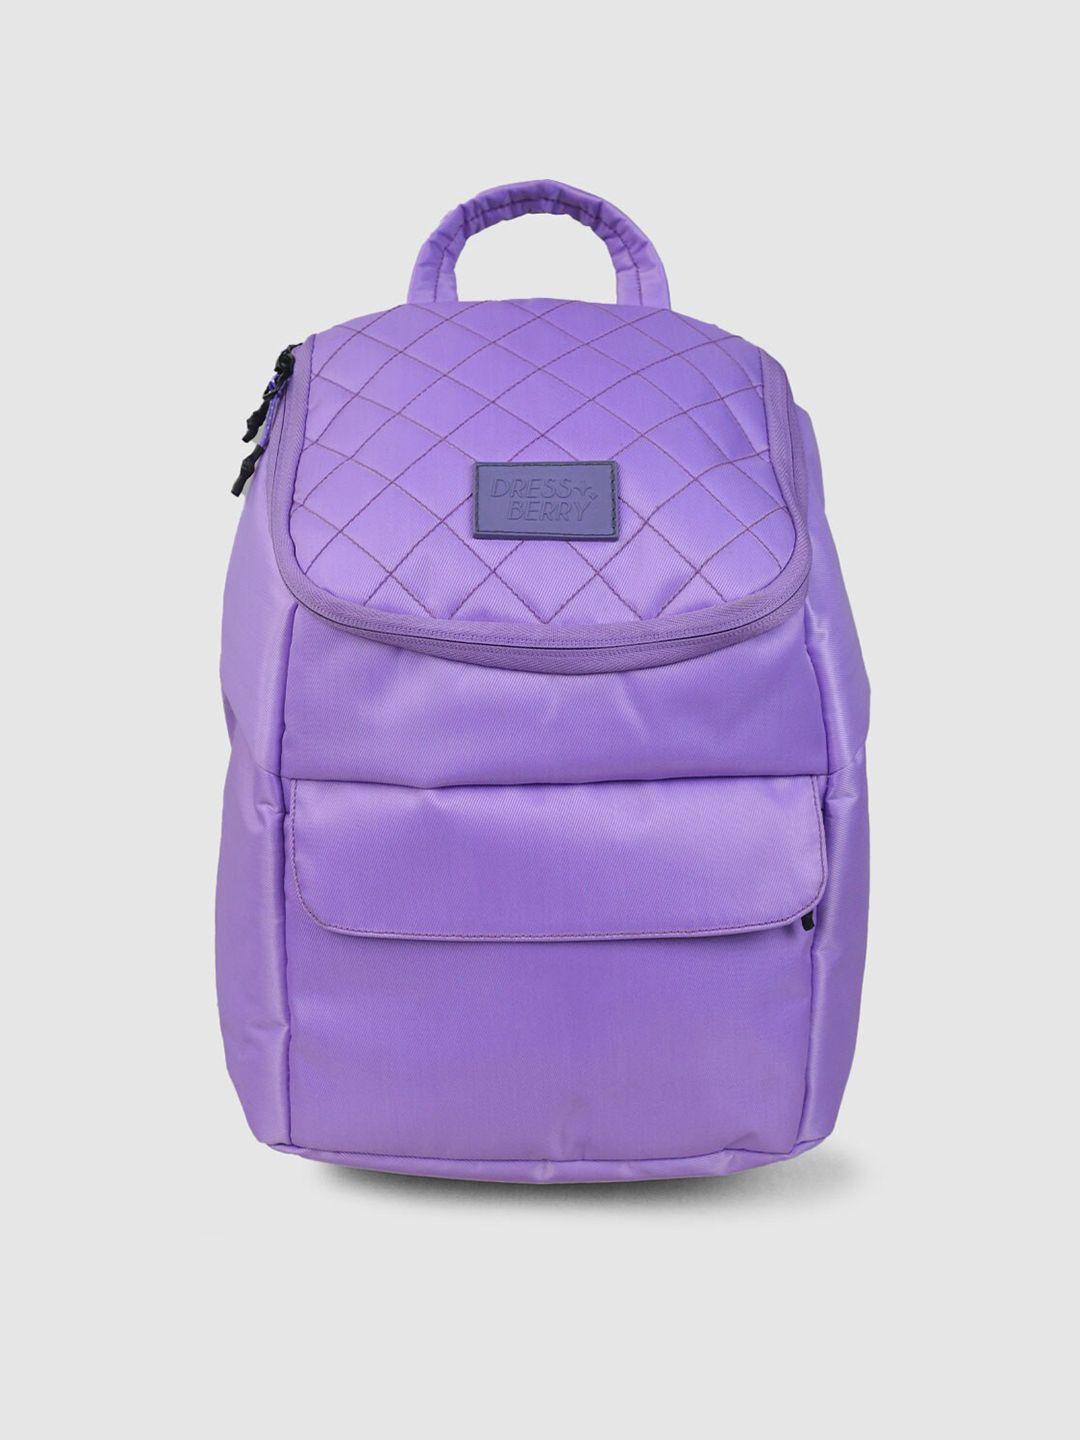 dressberry-women-purple-quilted-backpack